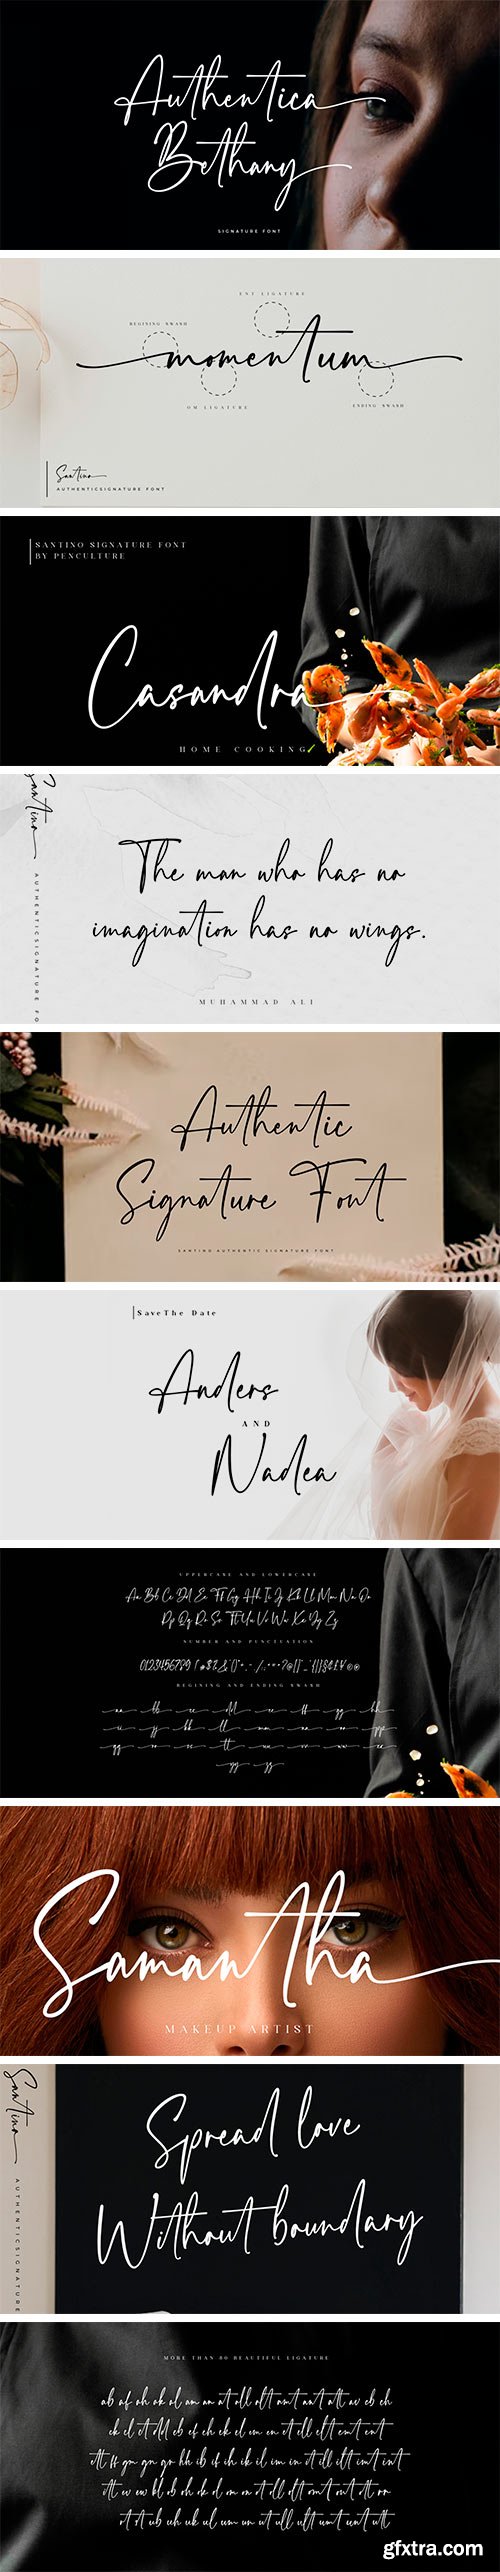 Authentica Bethany Font